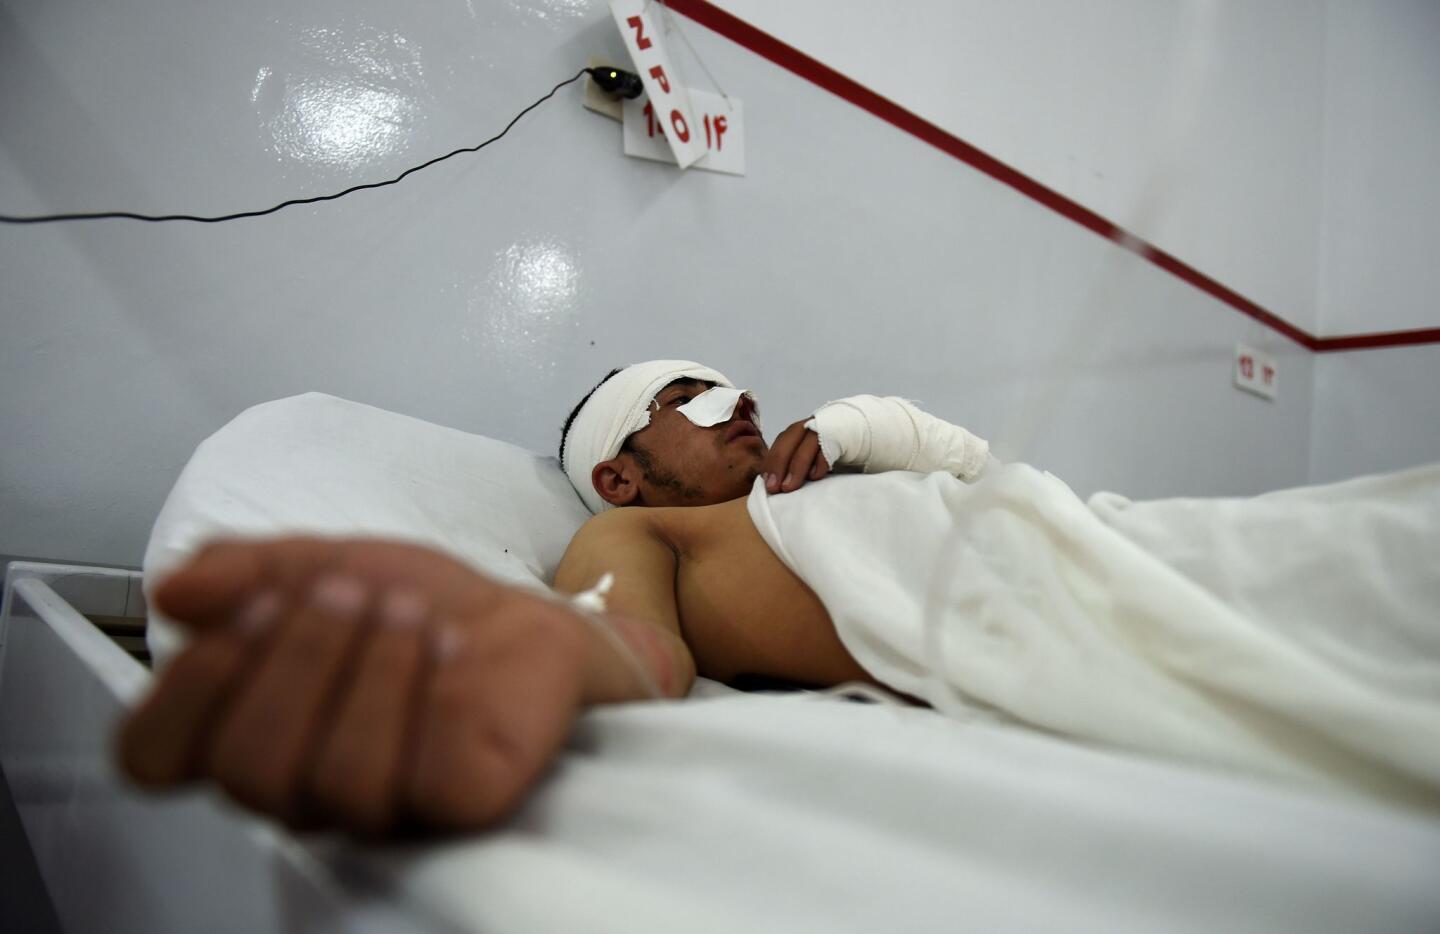 A wounded Afghan police cadet receives treatment at an Italian aid organization hospital in Kabul, following a suicide bomb attack on a convoy of buses transporting police cadets in the Afghan capital.